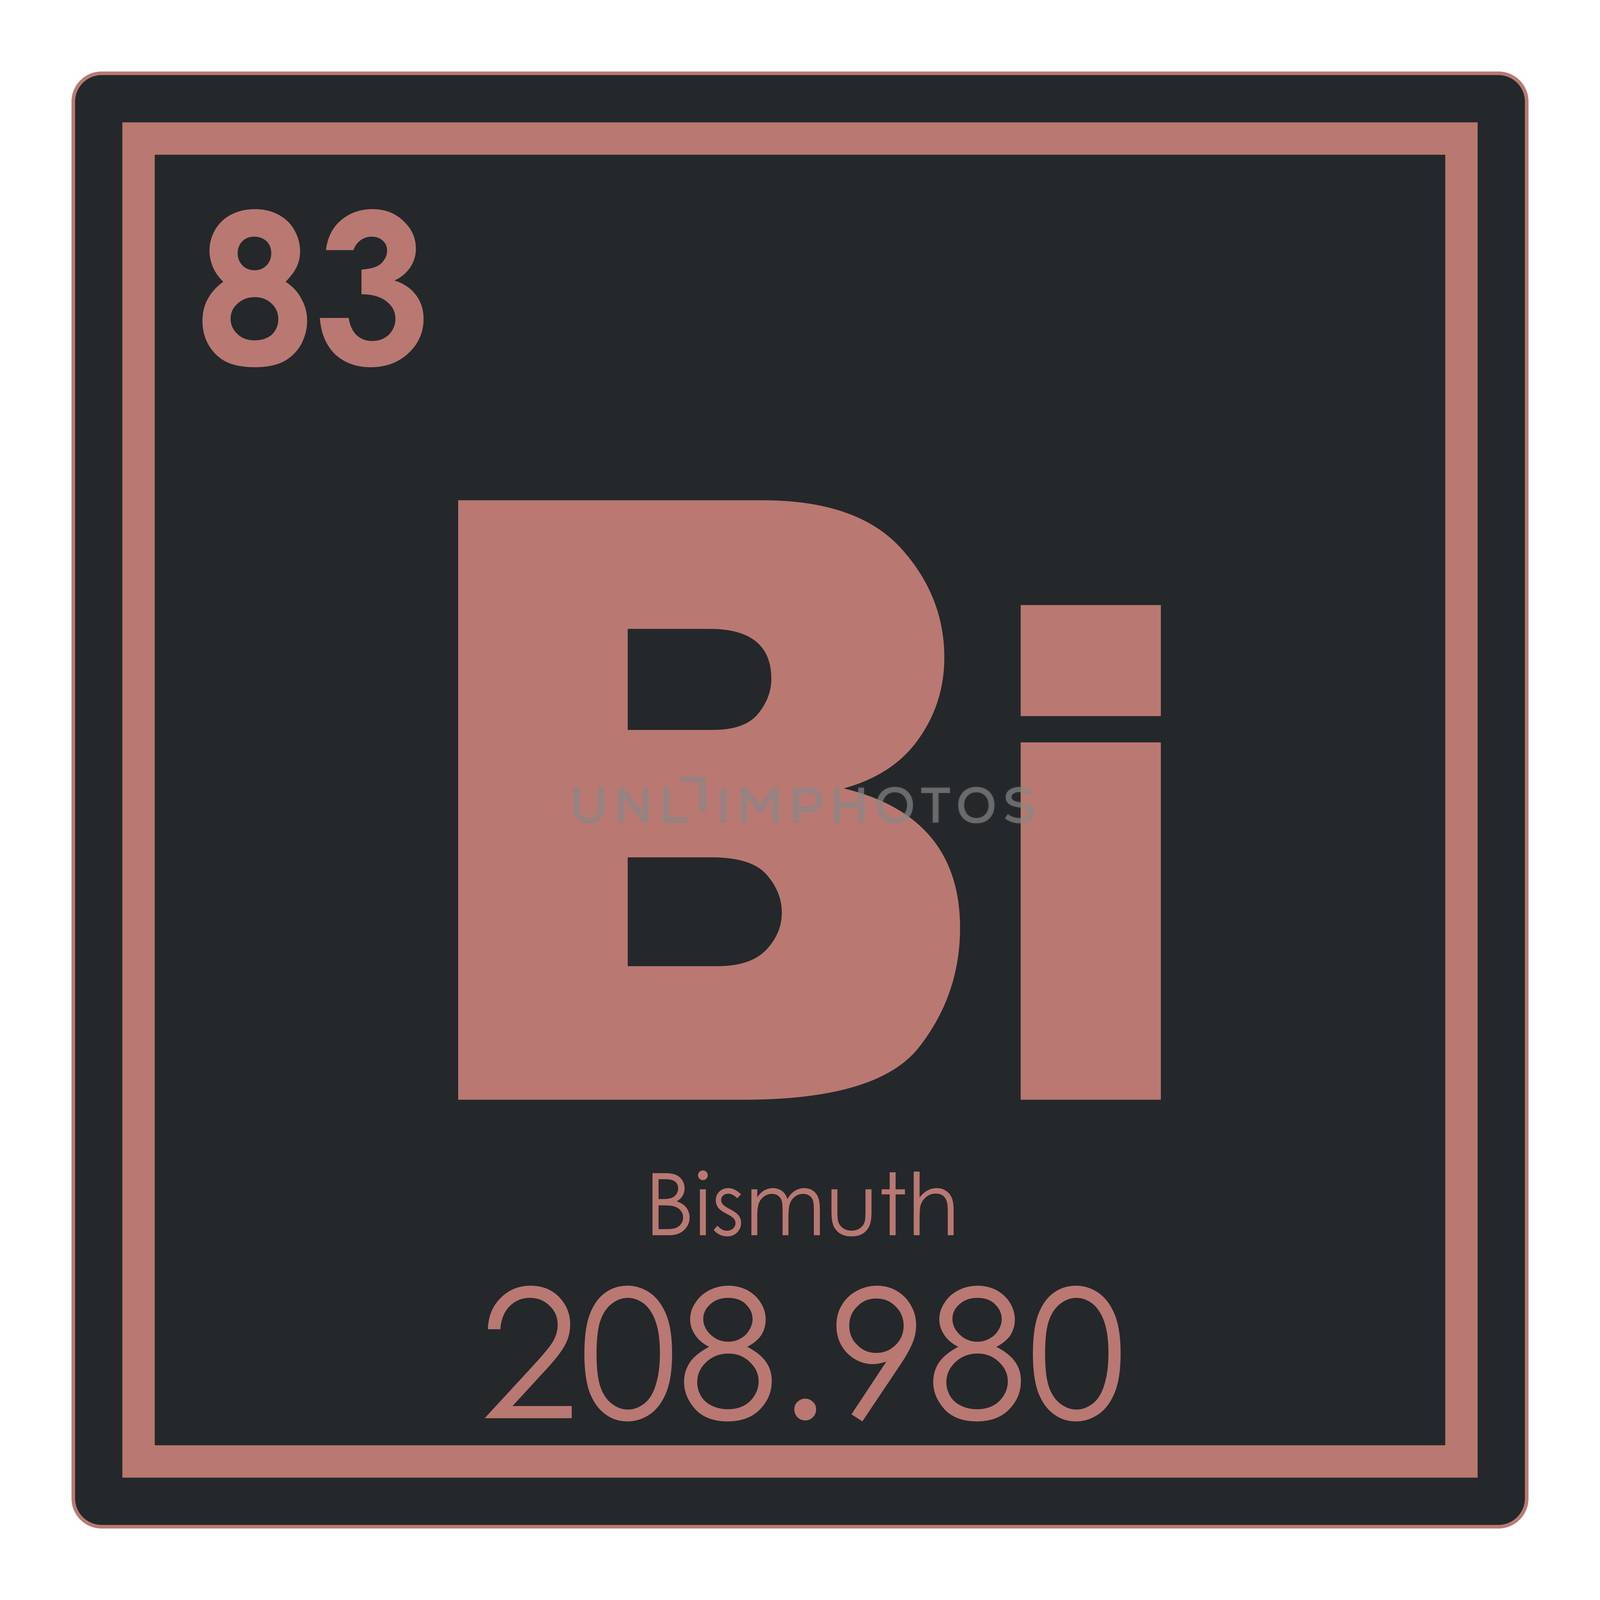 Bismuth chemical element periodic table science symbol